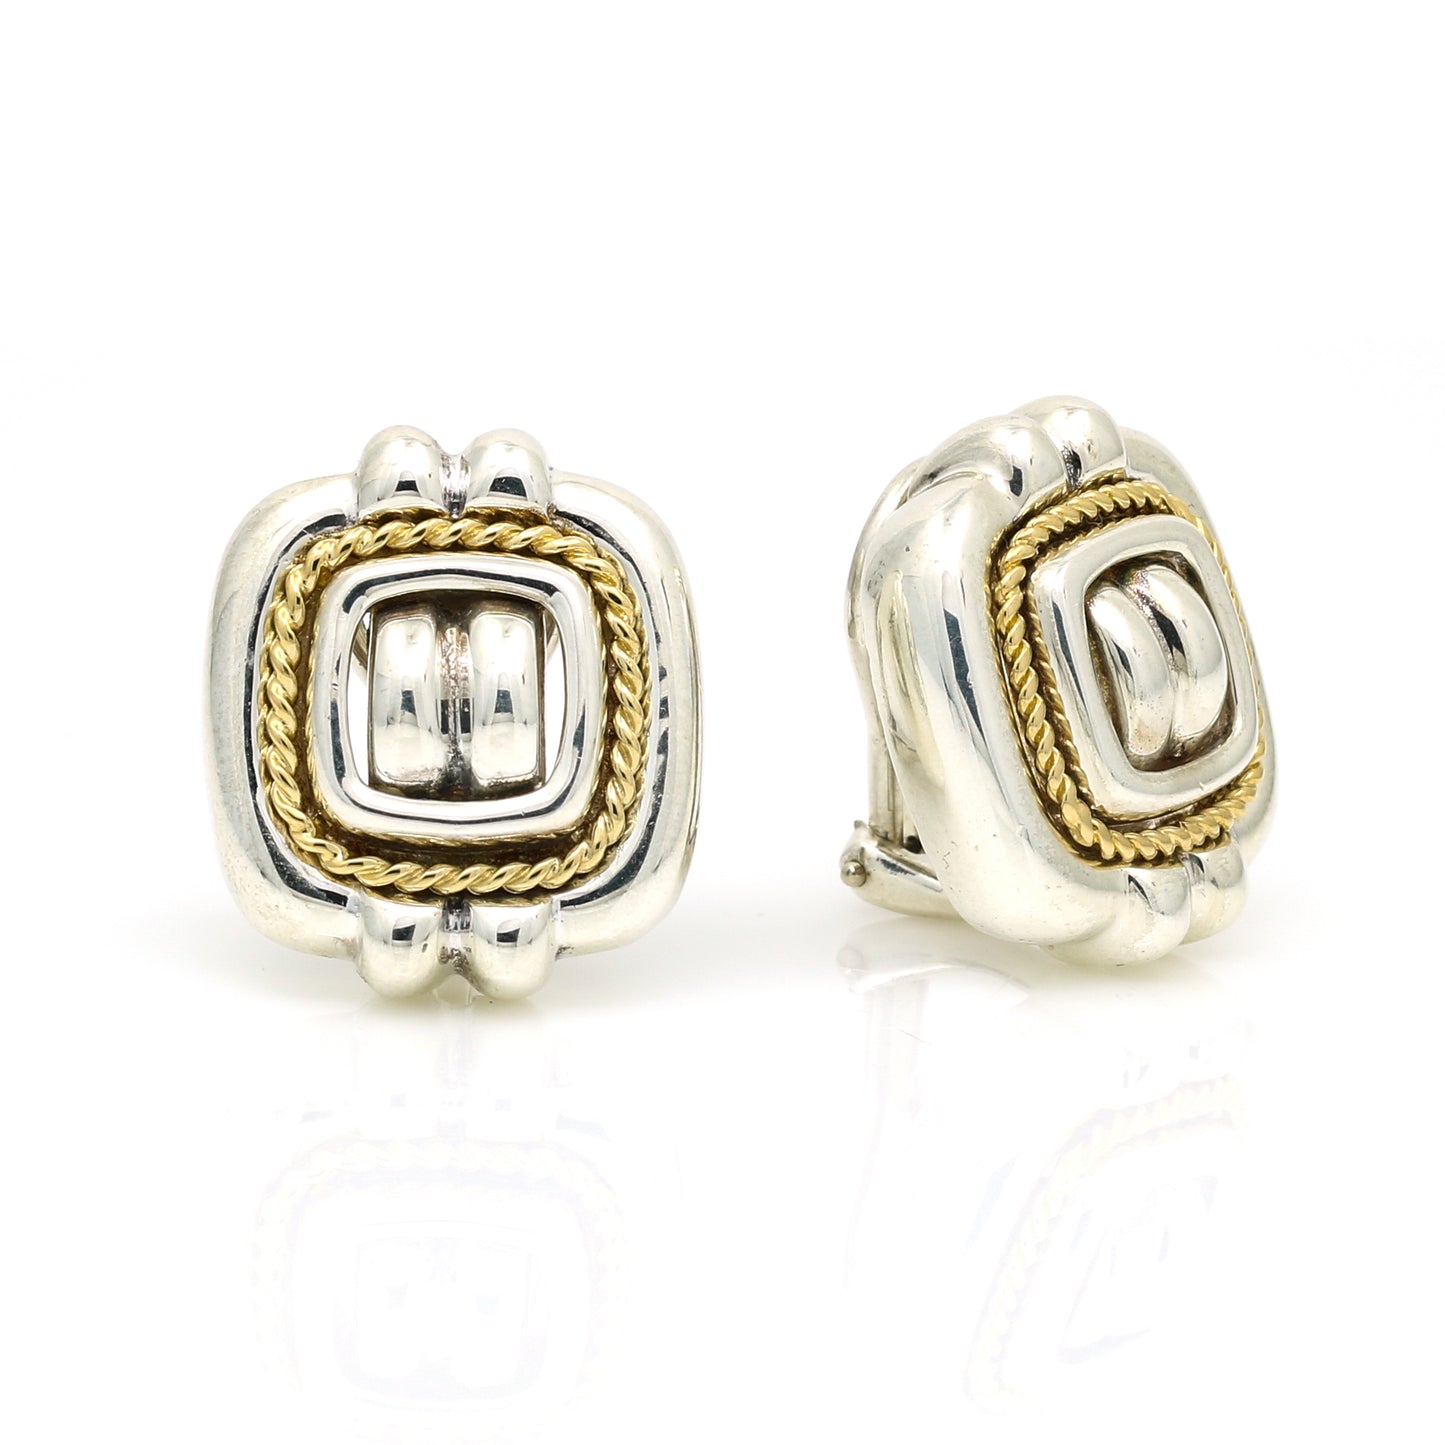 Tiffany & Co. Vintage Square Rope Earrings - Sterling Silver & 18k Gold